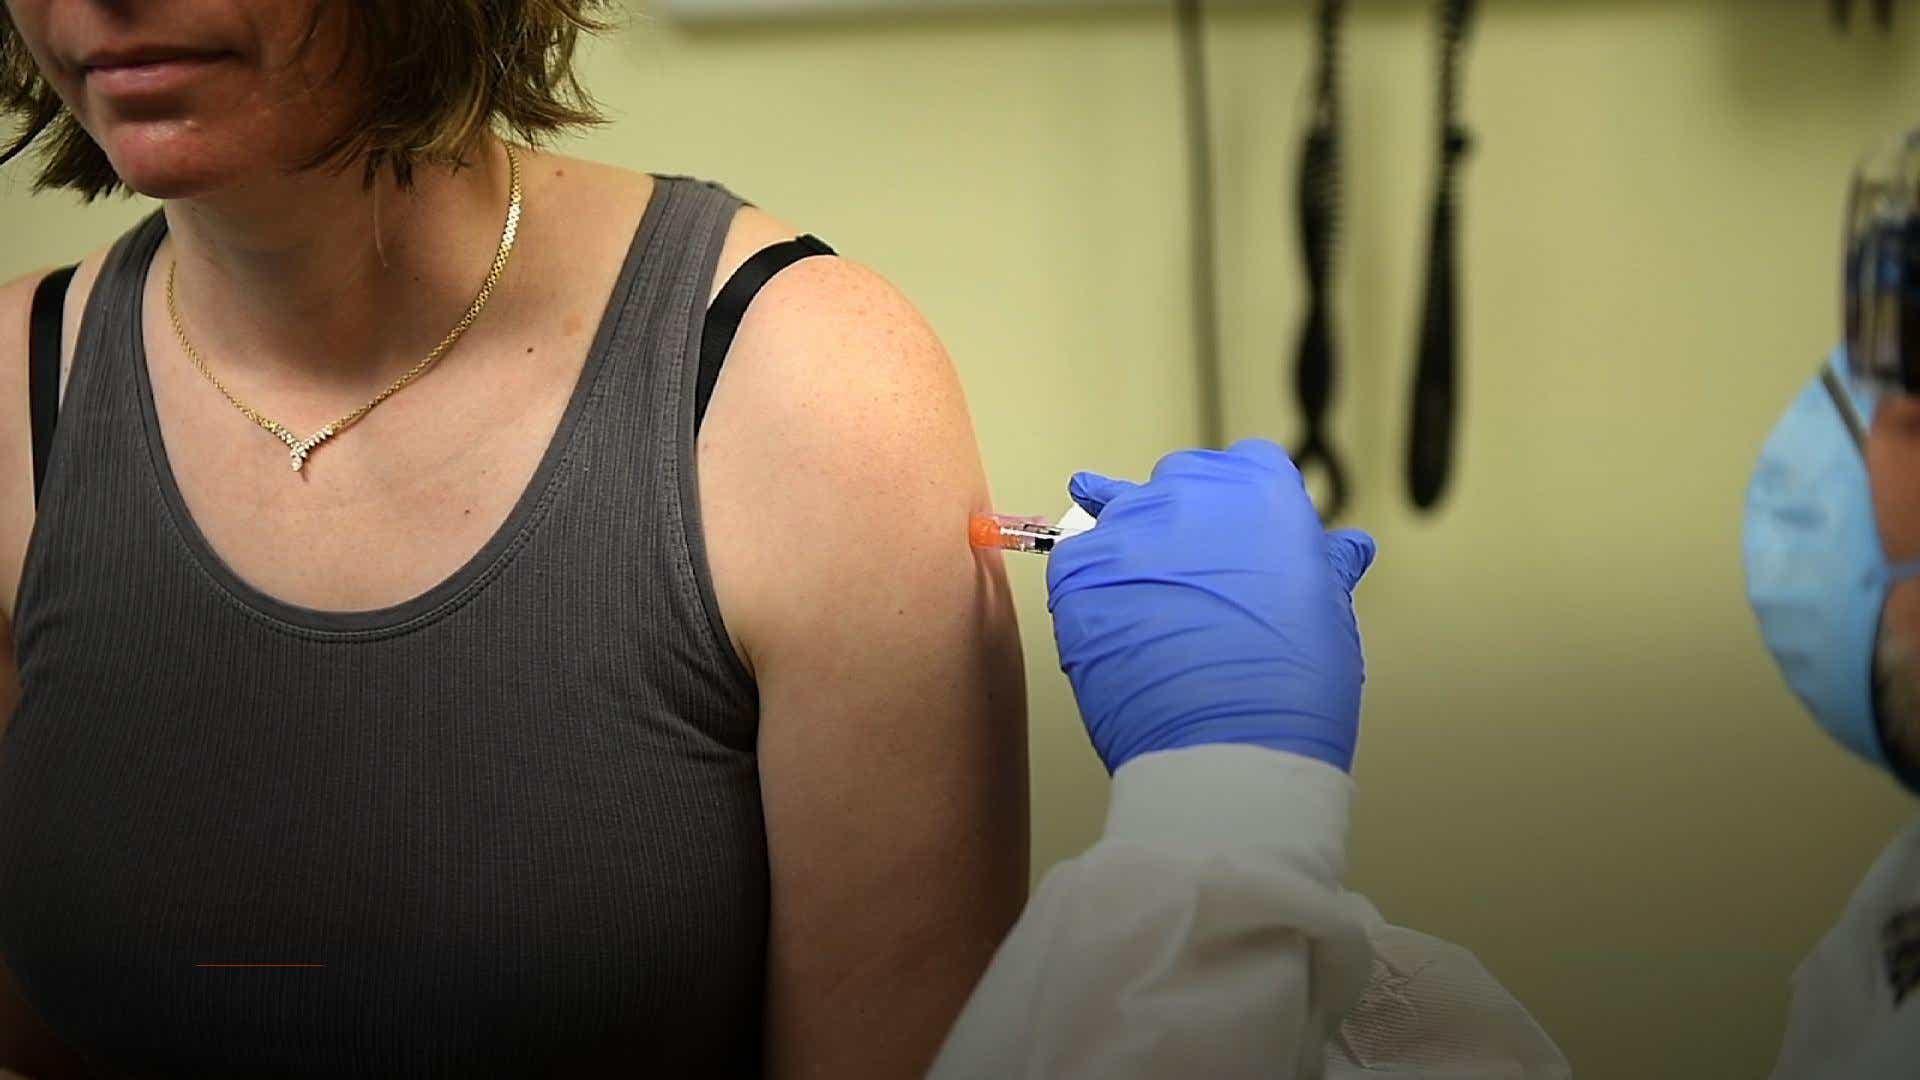 Coronavirus Vaccine Trial Underway In Seattle Photos Of First Shots Images, Photos, Reviews